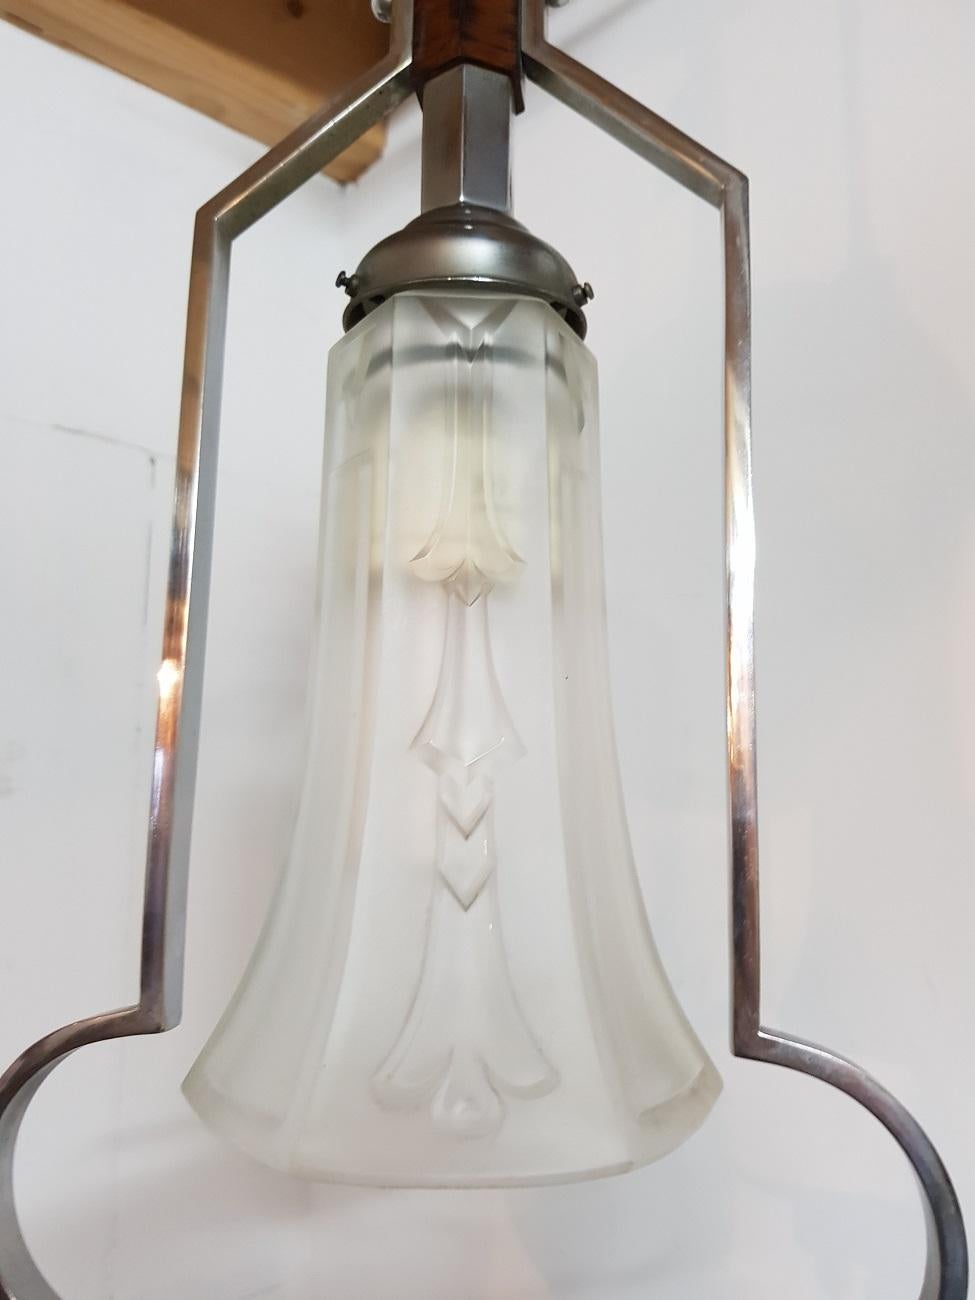 European 1930s Art Deco Chrome and Wooden Hall Pendant with Glass Shade For Sale